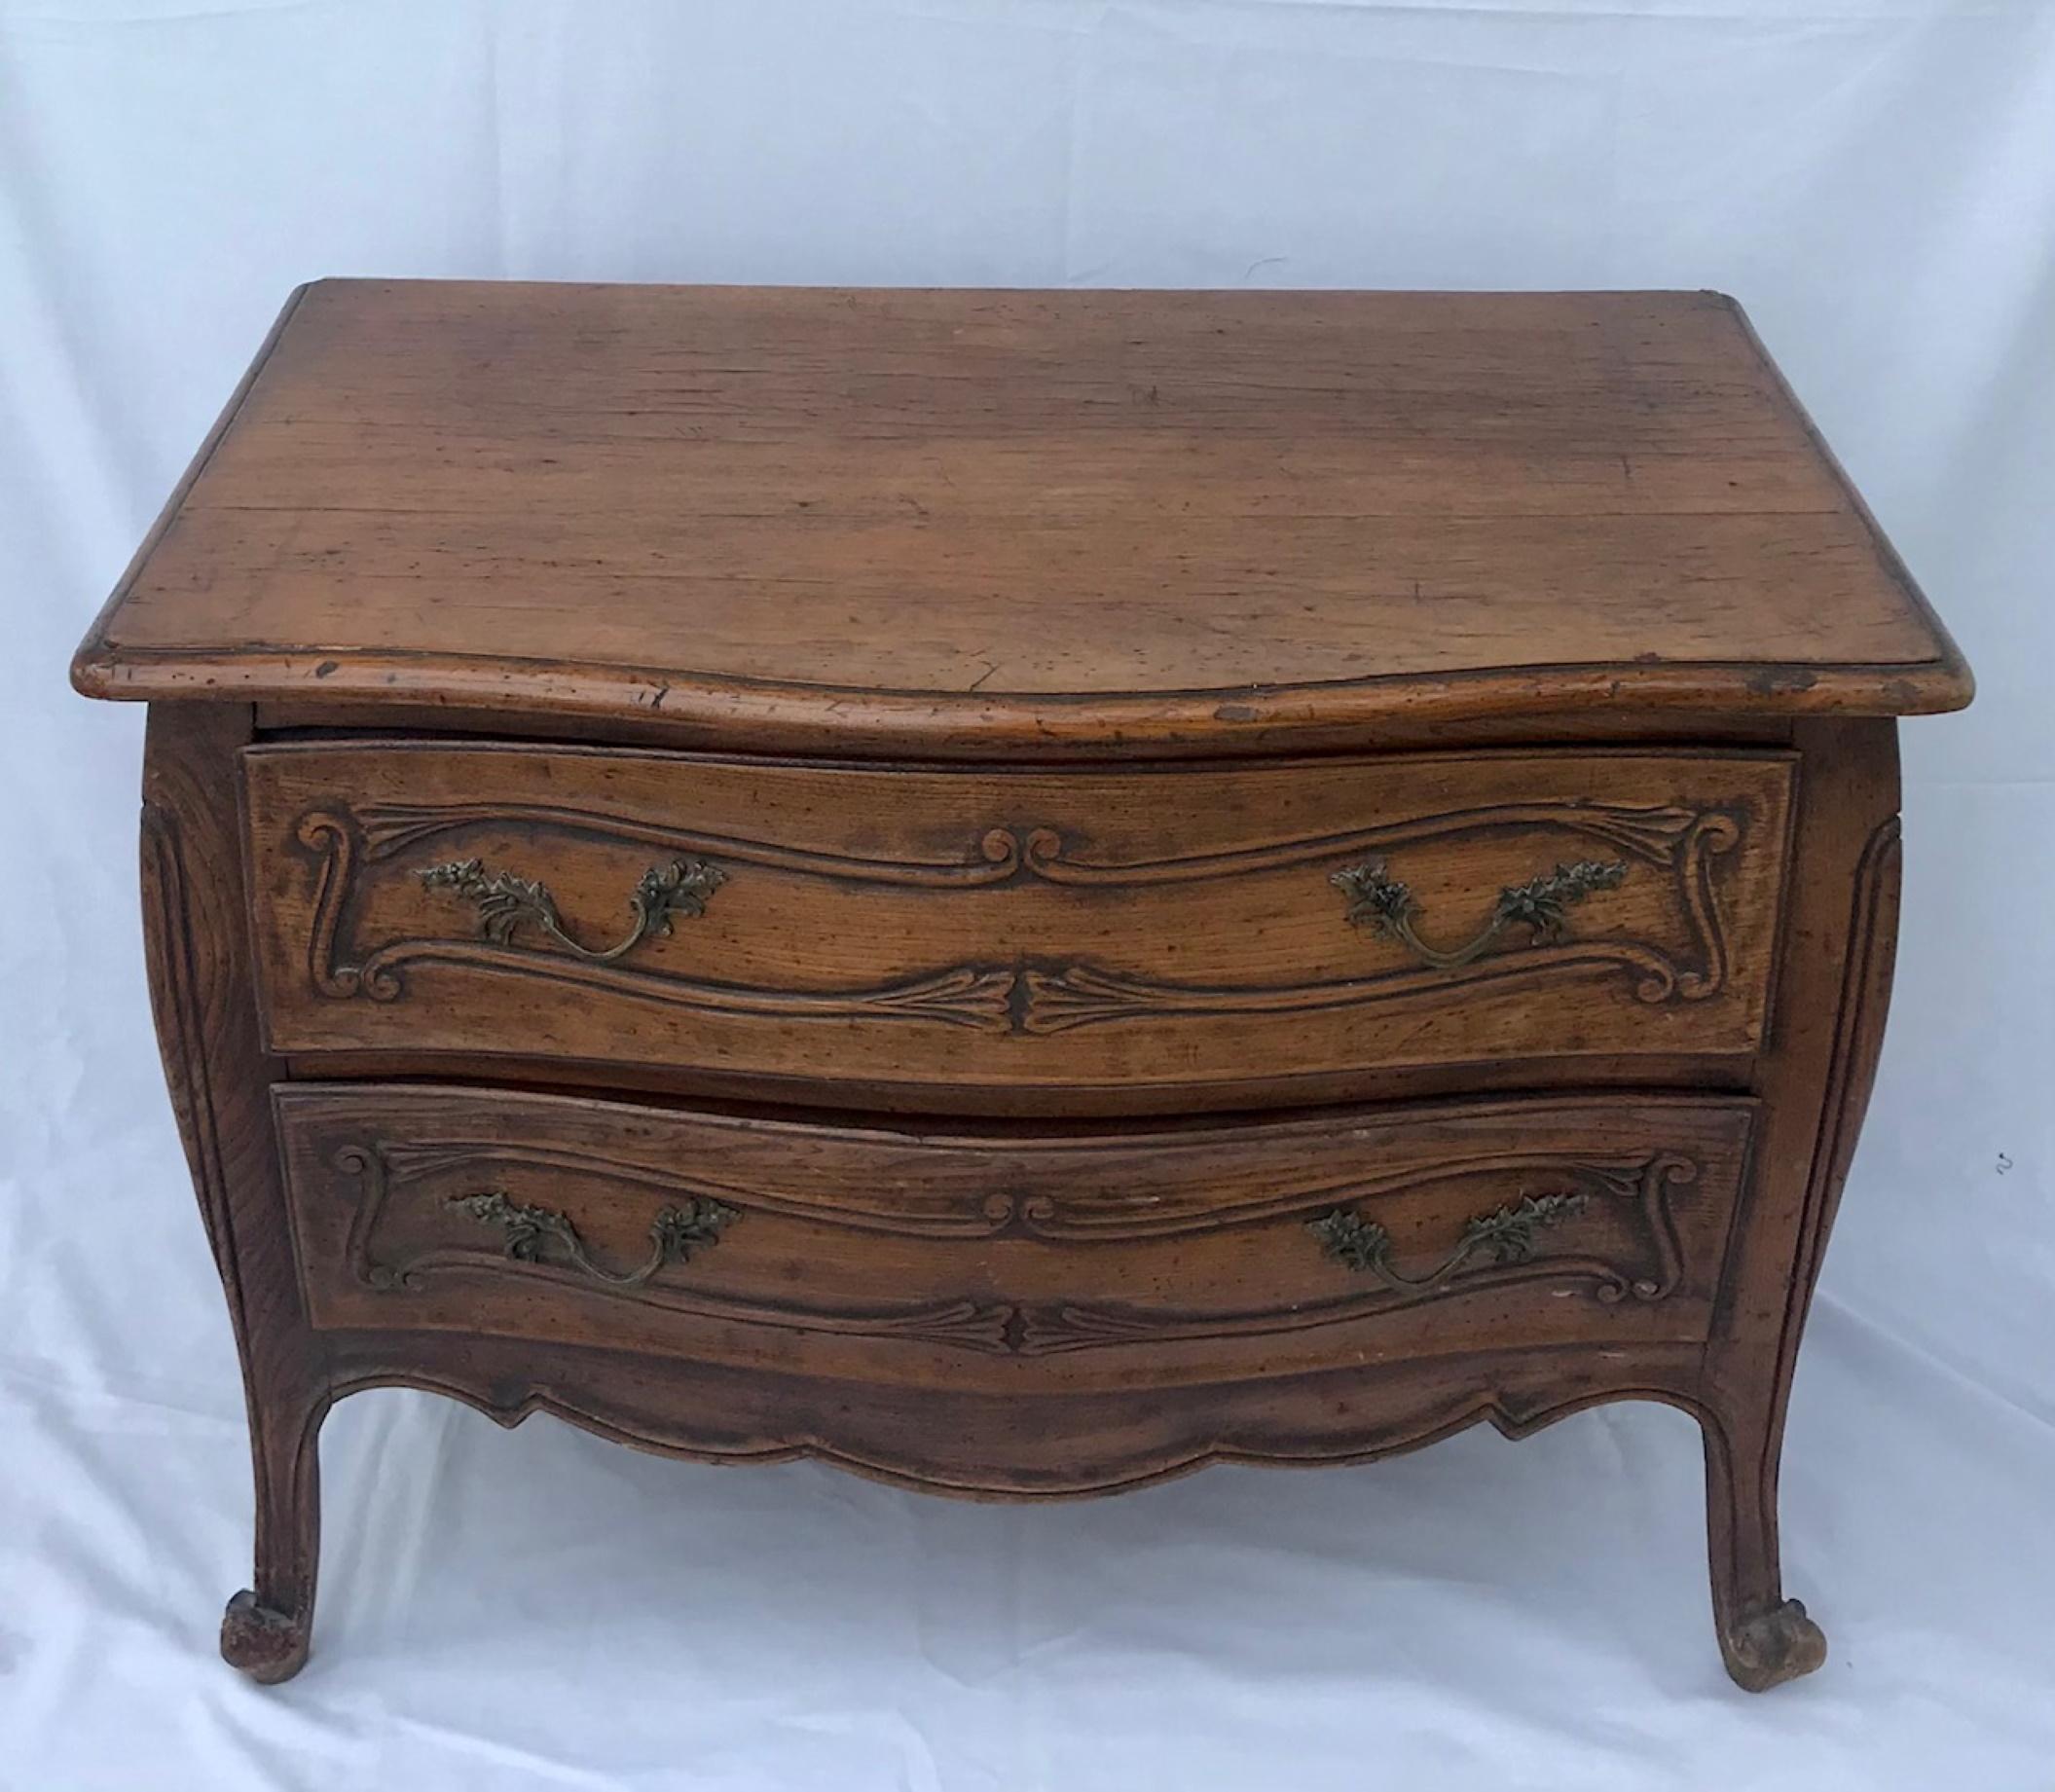 19th Century Diminutive French Provincial Child’s Chest of Drawers In Good Condition For Sale In Vero Beach, FL